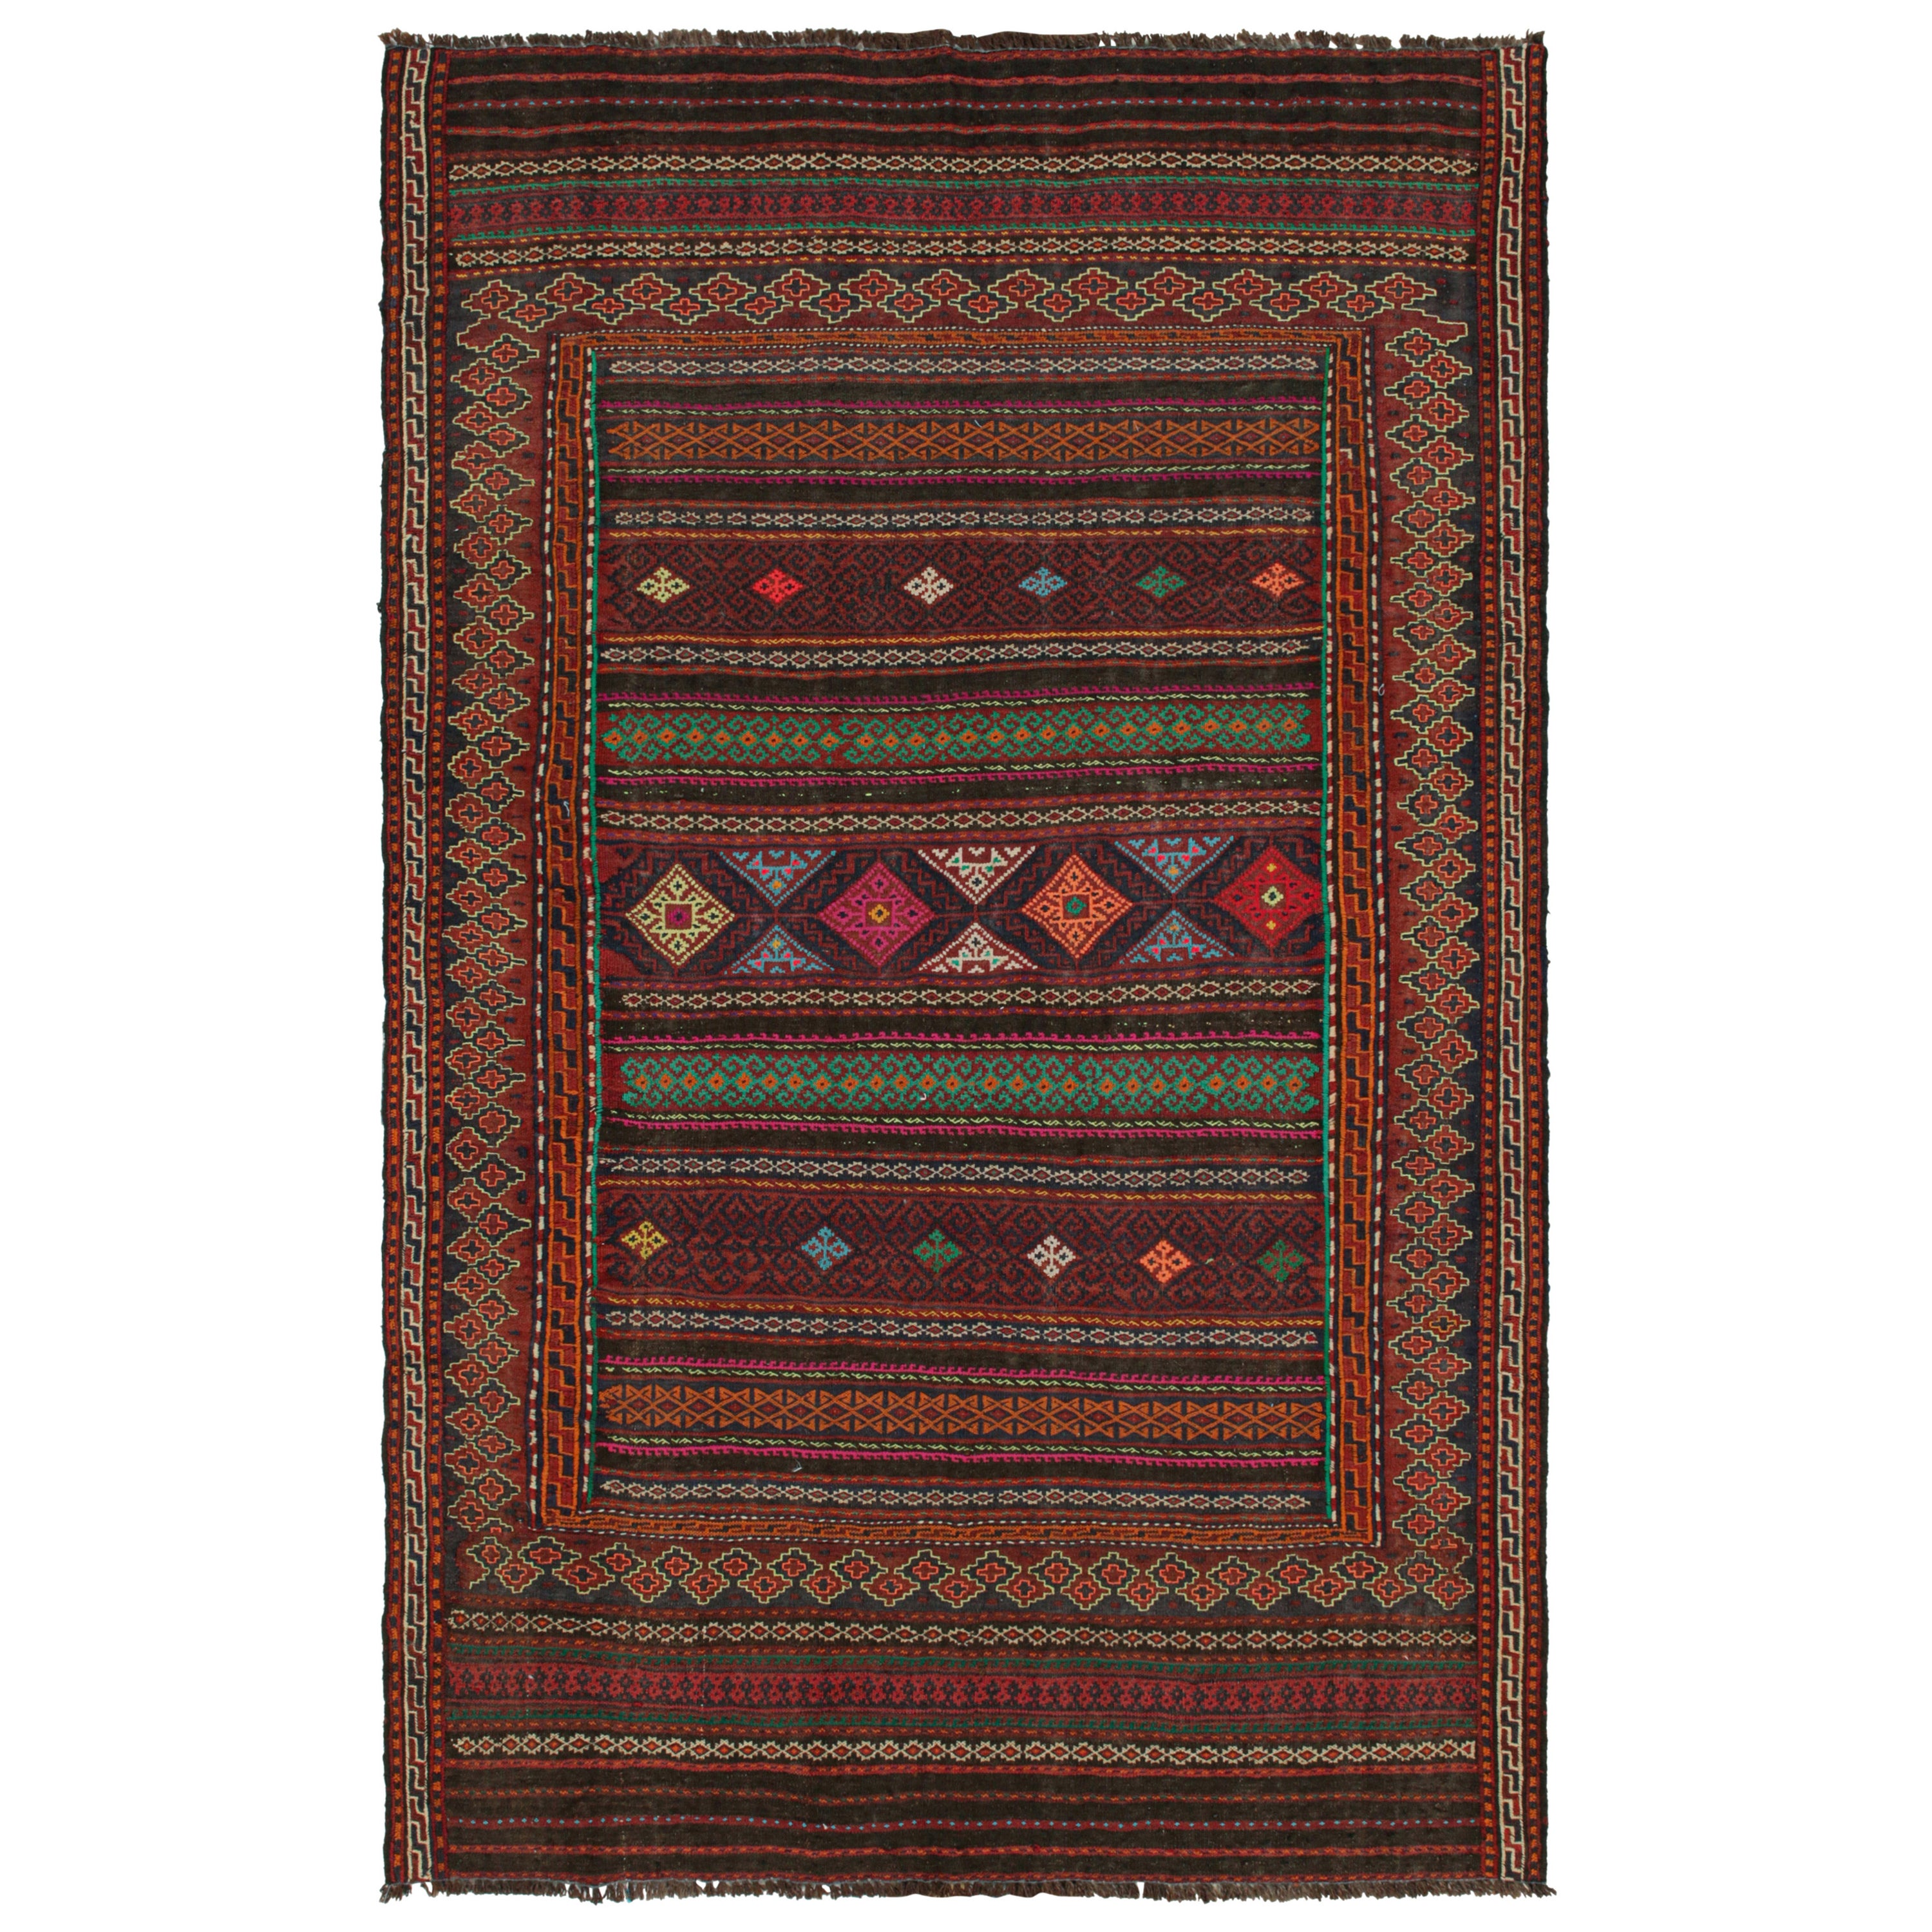 Vintage Baluch Tribal Kilim in Brown with Geometric Patterns, from Rug & Kilim